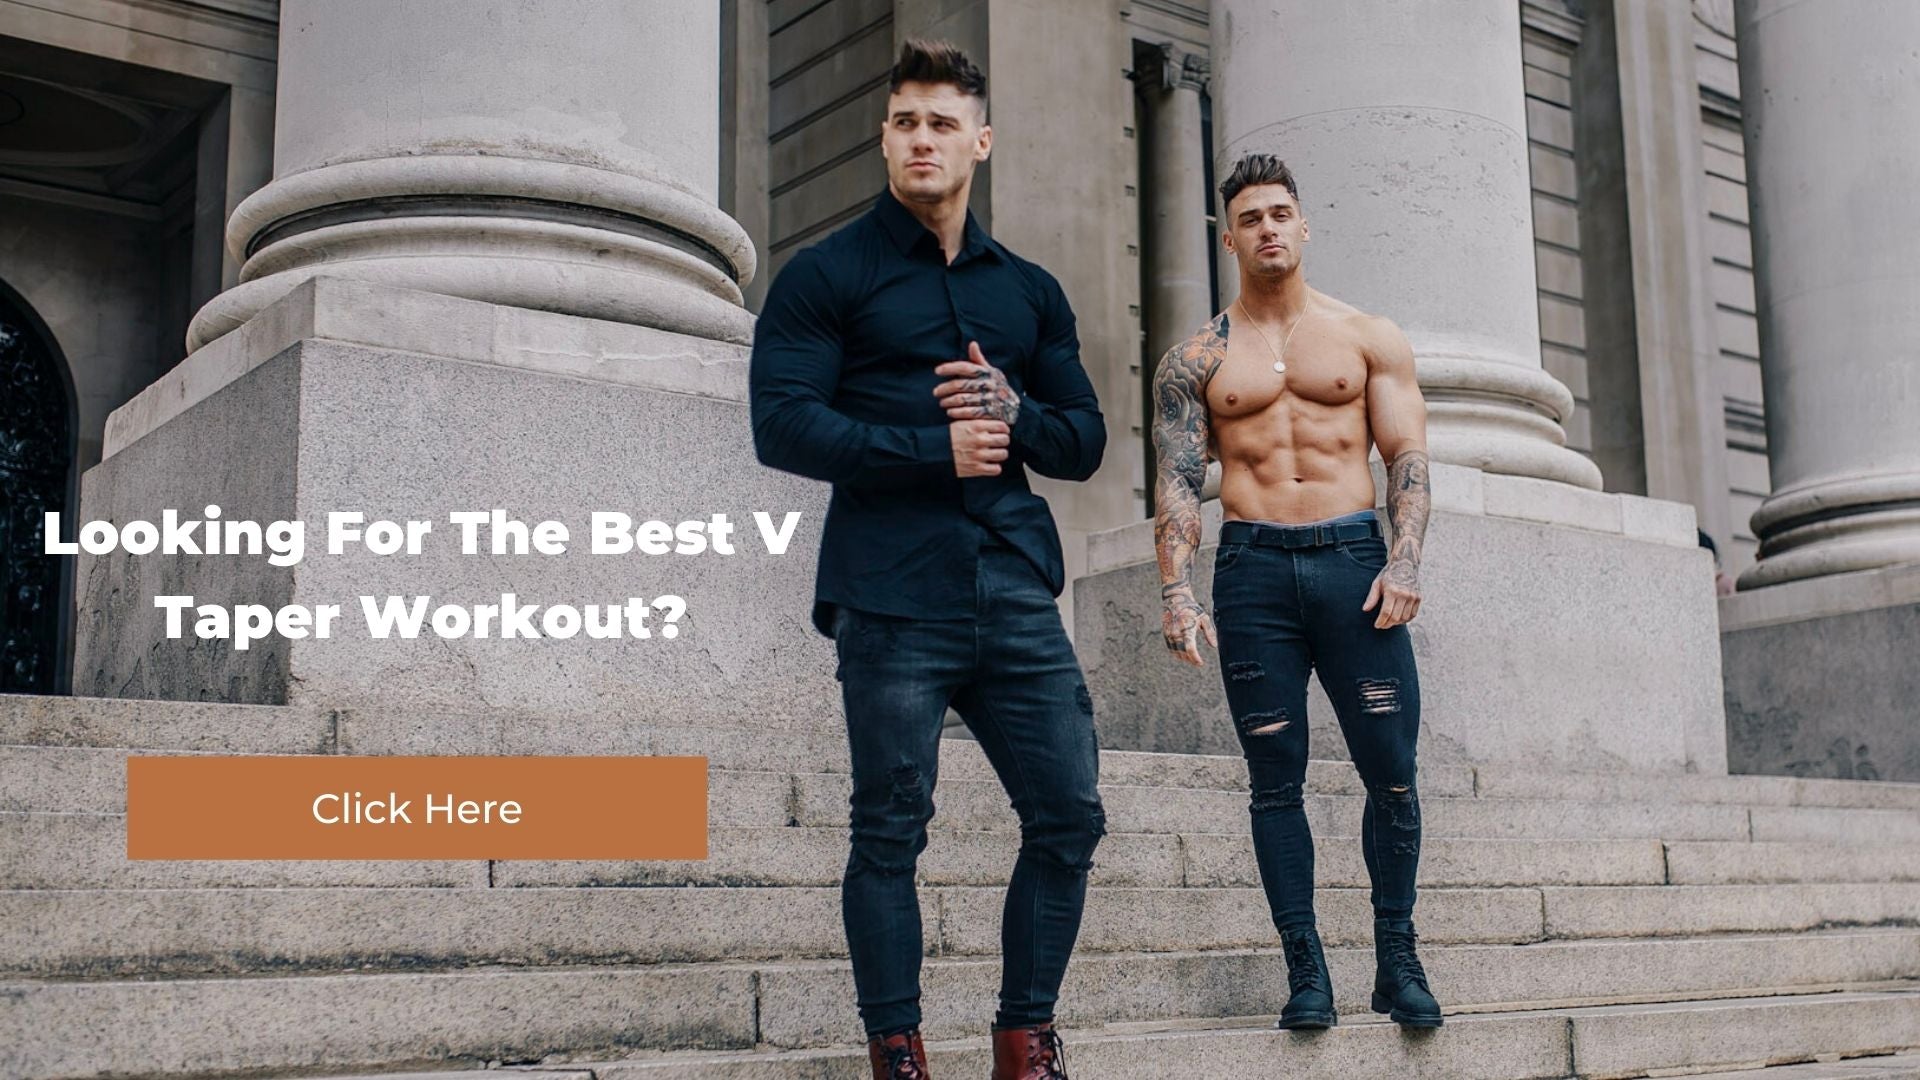 https://cdn.shopify.com/s/files/1/0281/0049/3396/files/Looking_for_the_Best_Muscle_Fit_Shirts_3_2048x2048.jpg?v=1645519549